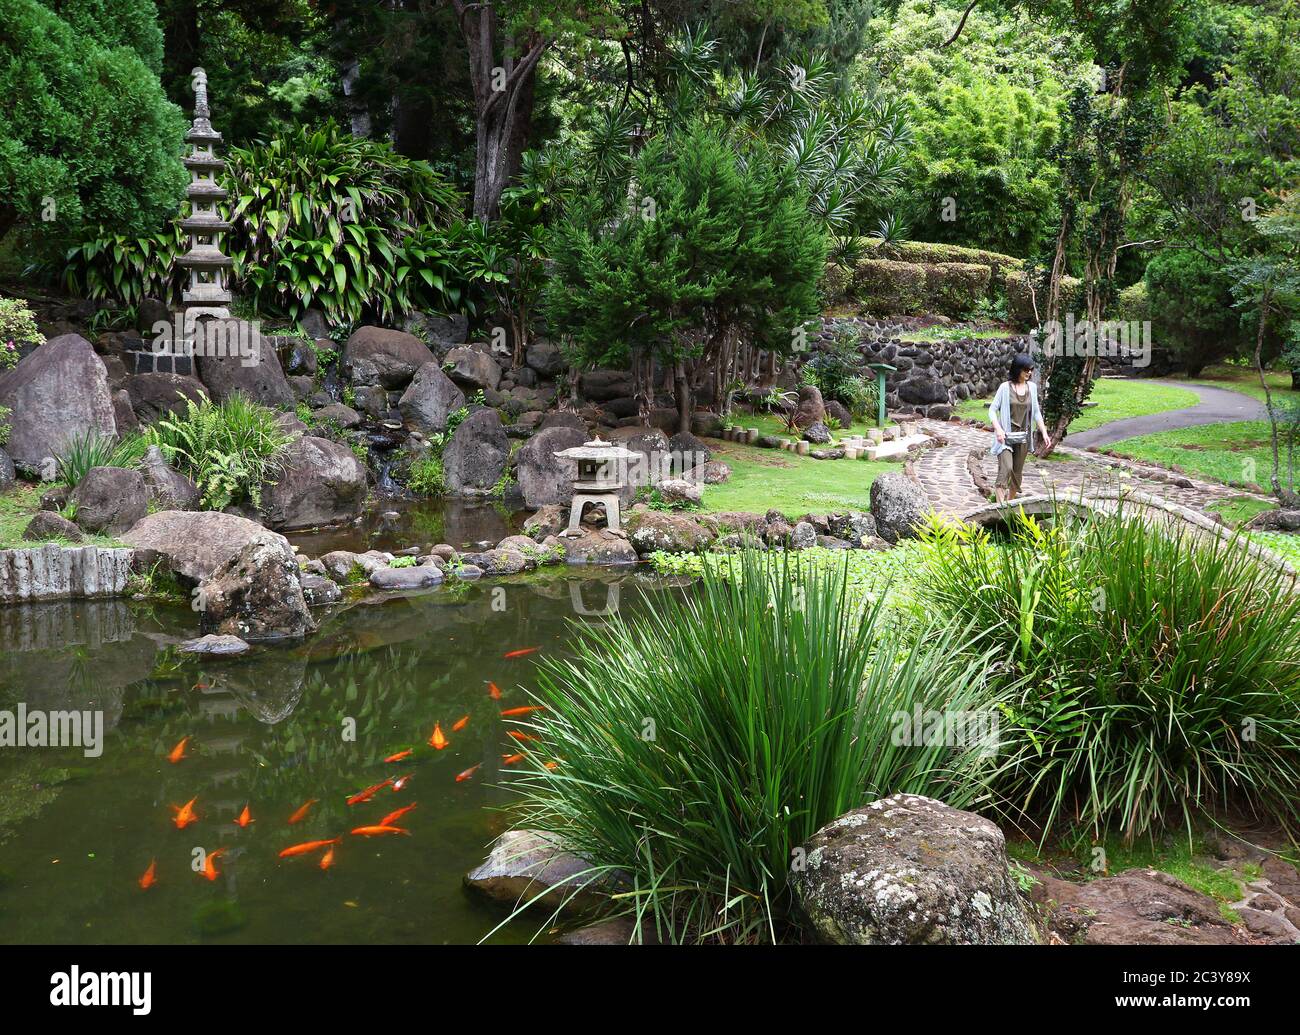 A Japanese garden with a koi pond in Iao Valley state park on Maui, Hawaii. Stock Photo